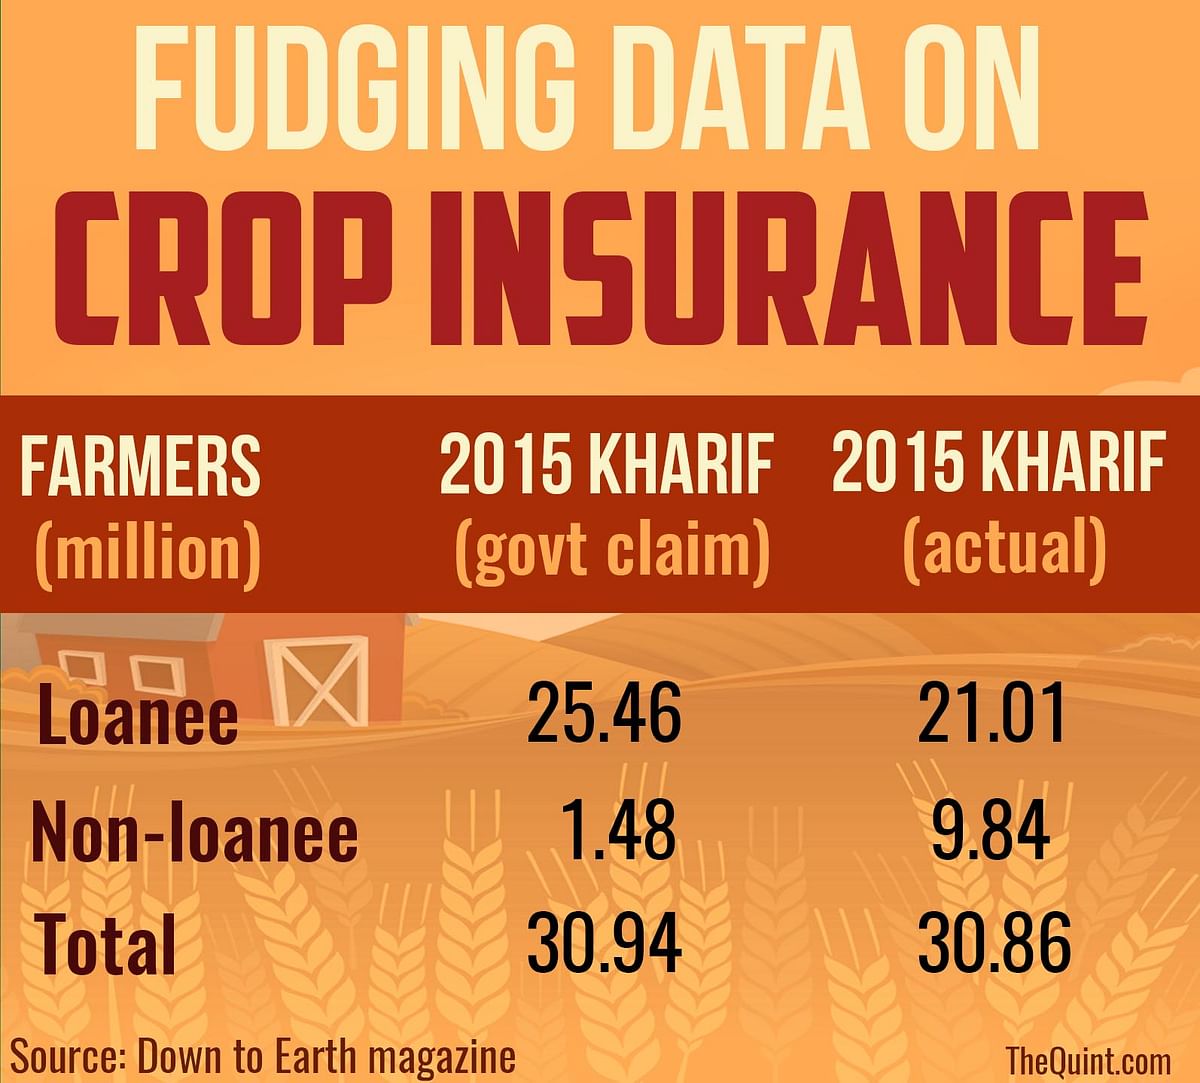 Modi’s tall claims on agricultural output, insurance schemes, and irrigation don’t hold ground against a fact-check.